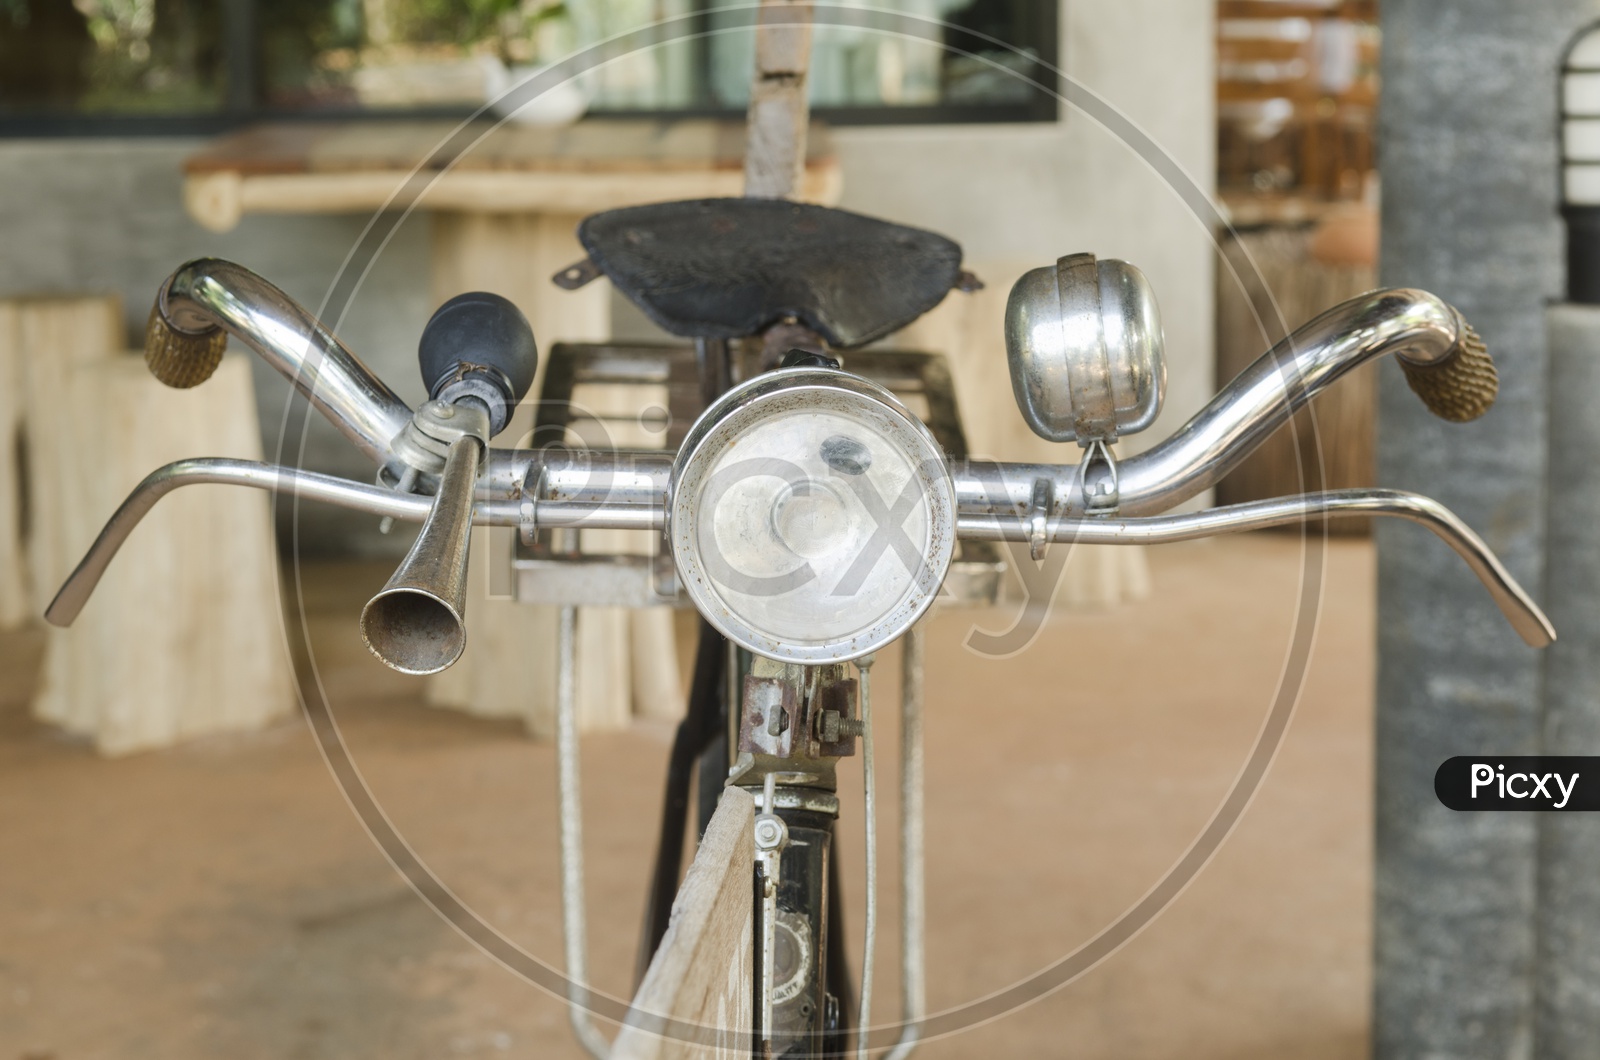 Vintage Bicycle Or Cycle With dynamo Light